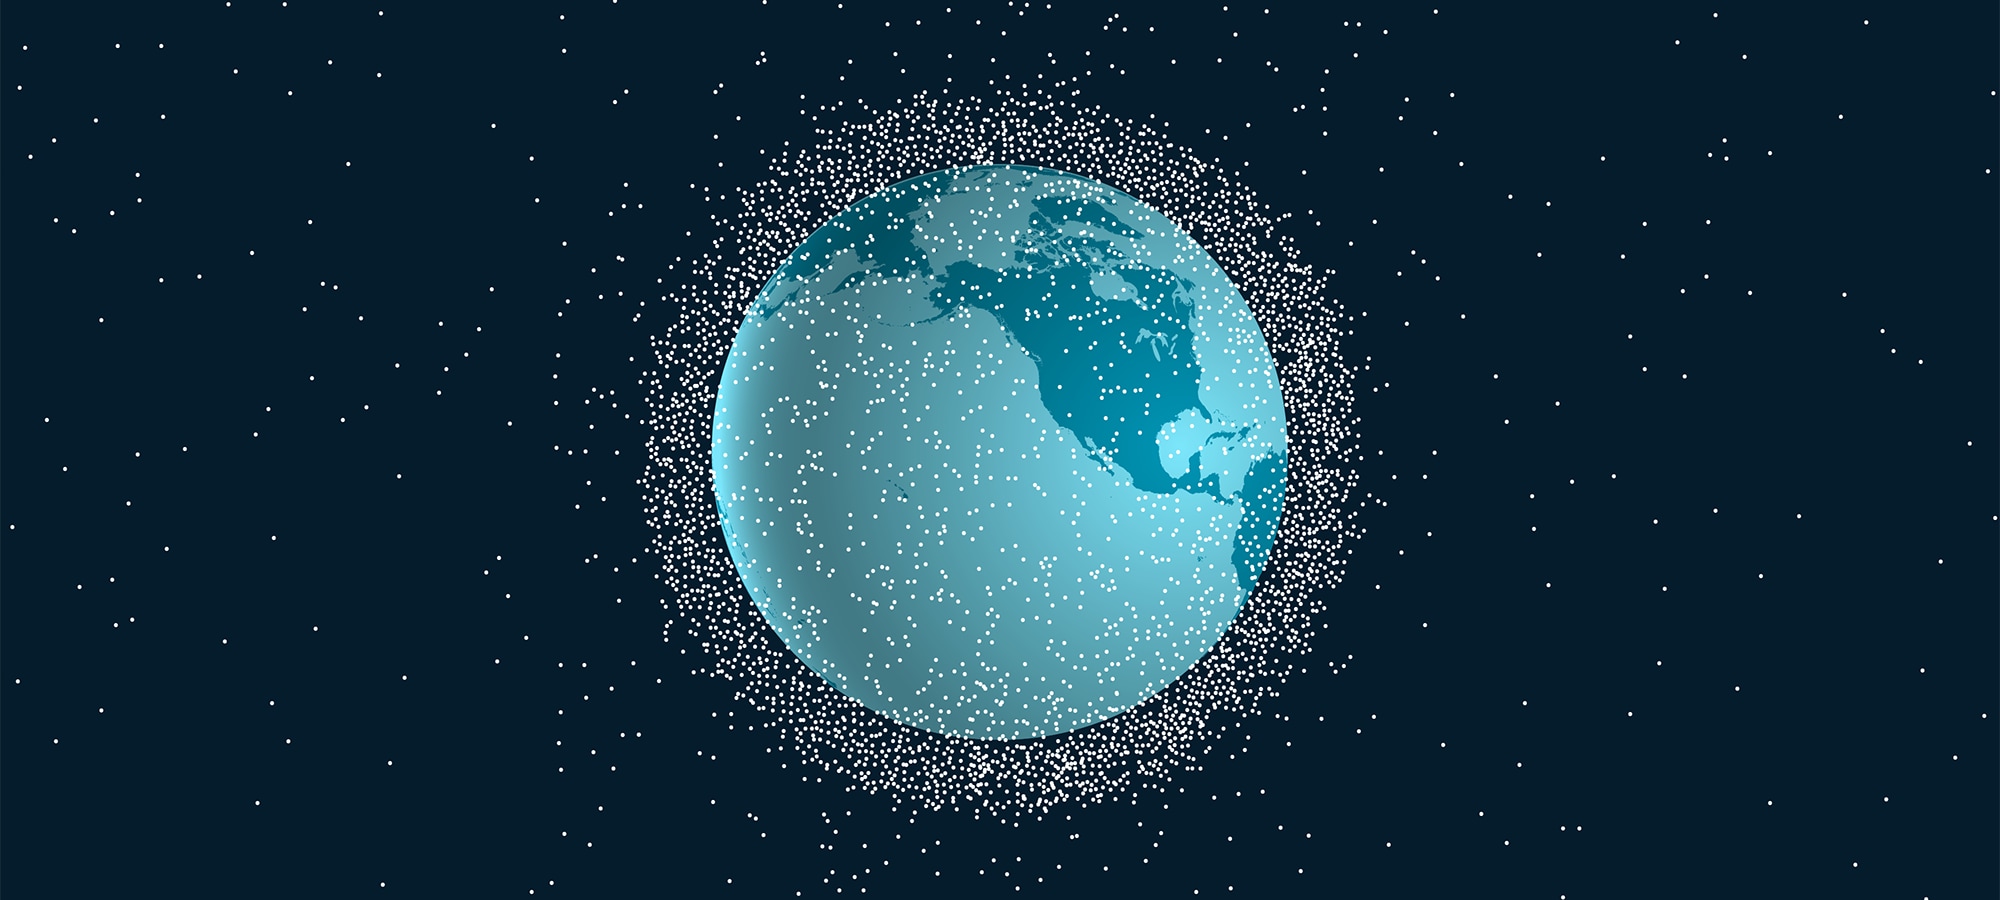 Space junk facts: Why space cleanup matters | McKinsey